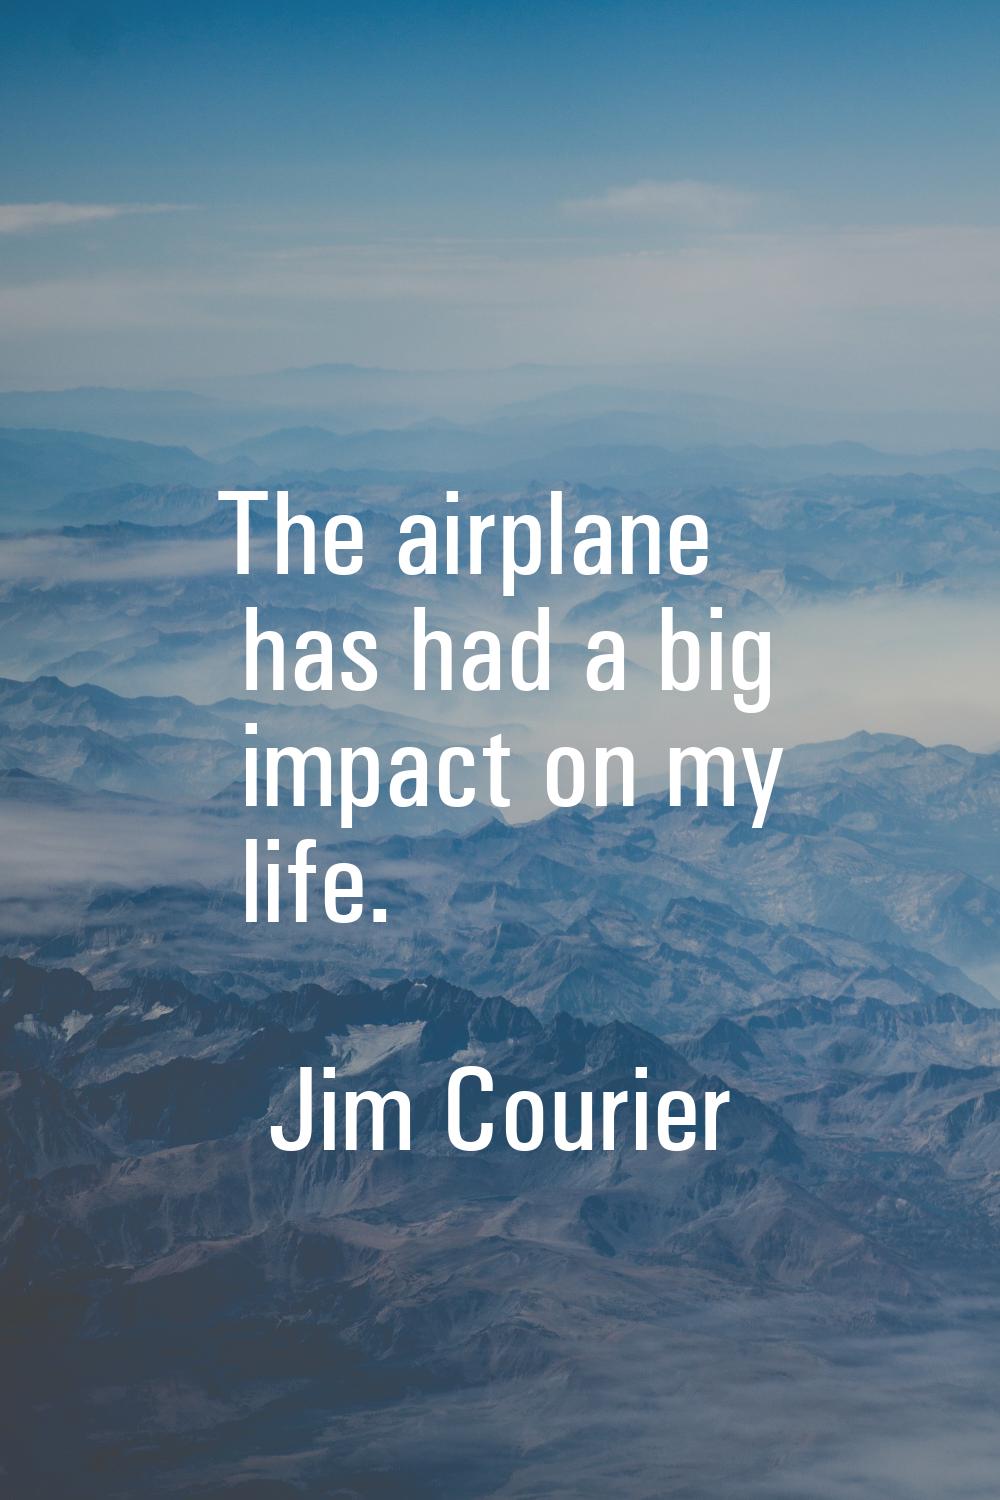 The airplane has had a big impact on my life.